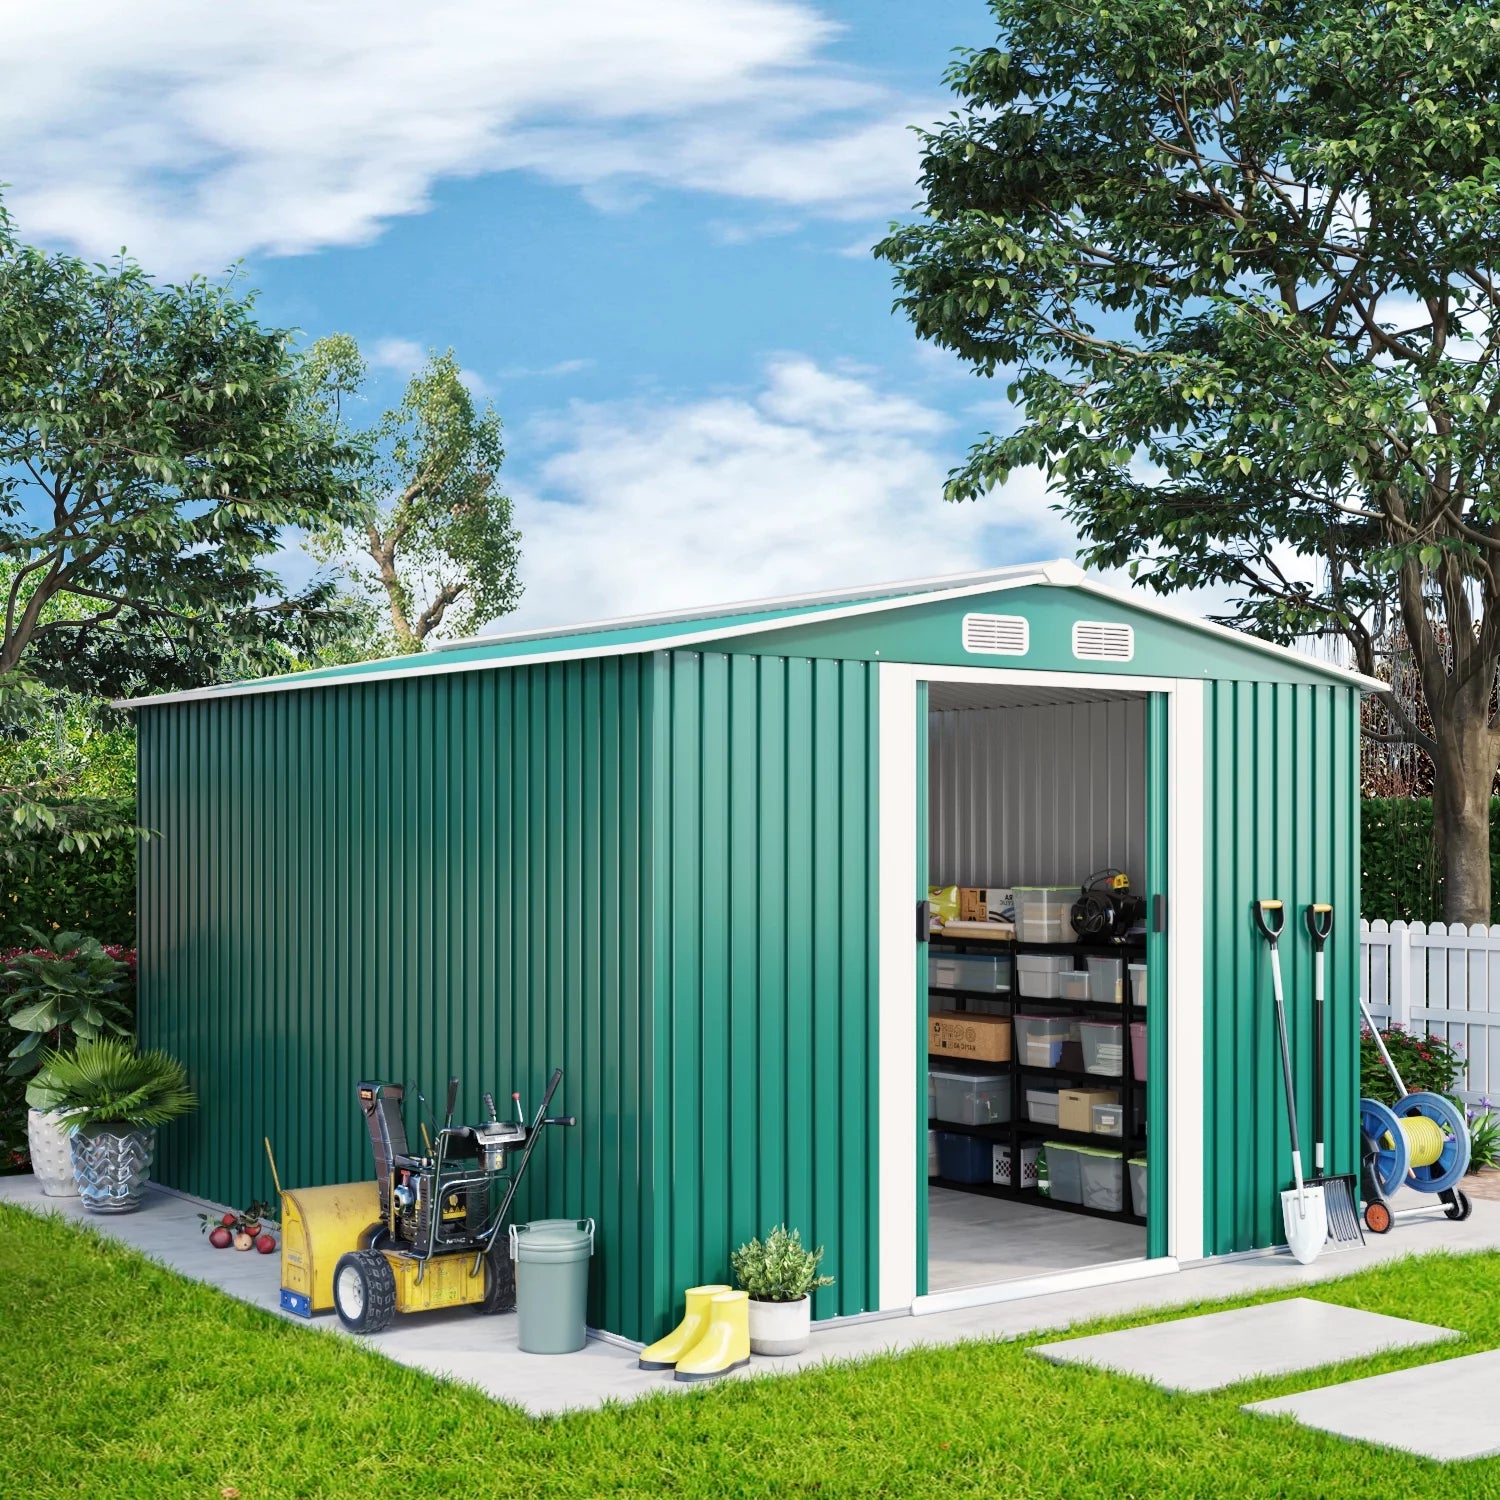 an 8x10 ft metal outdoor storage shed with shelves inside and garden tools outside